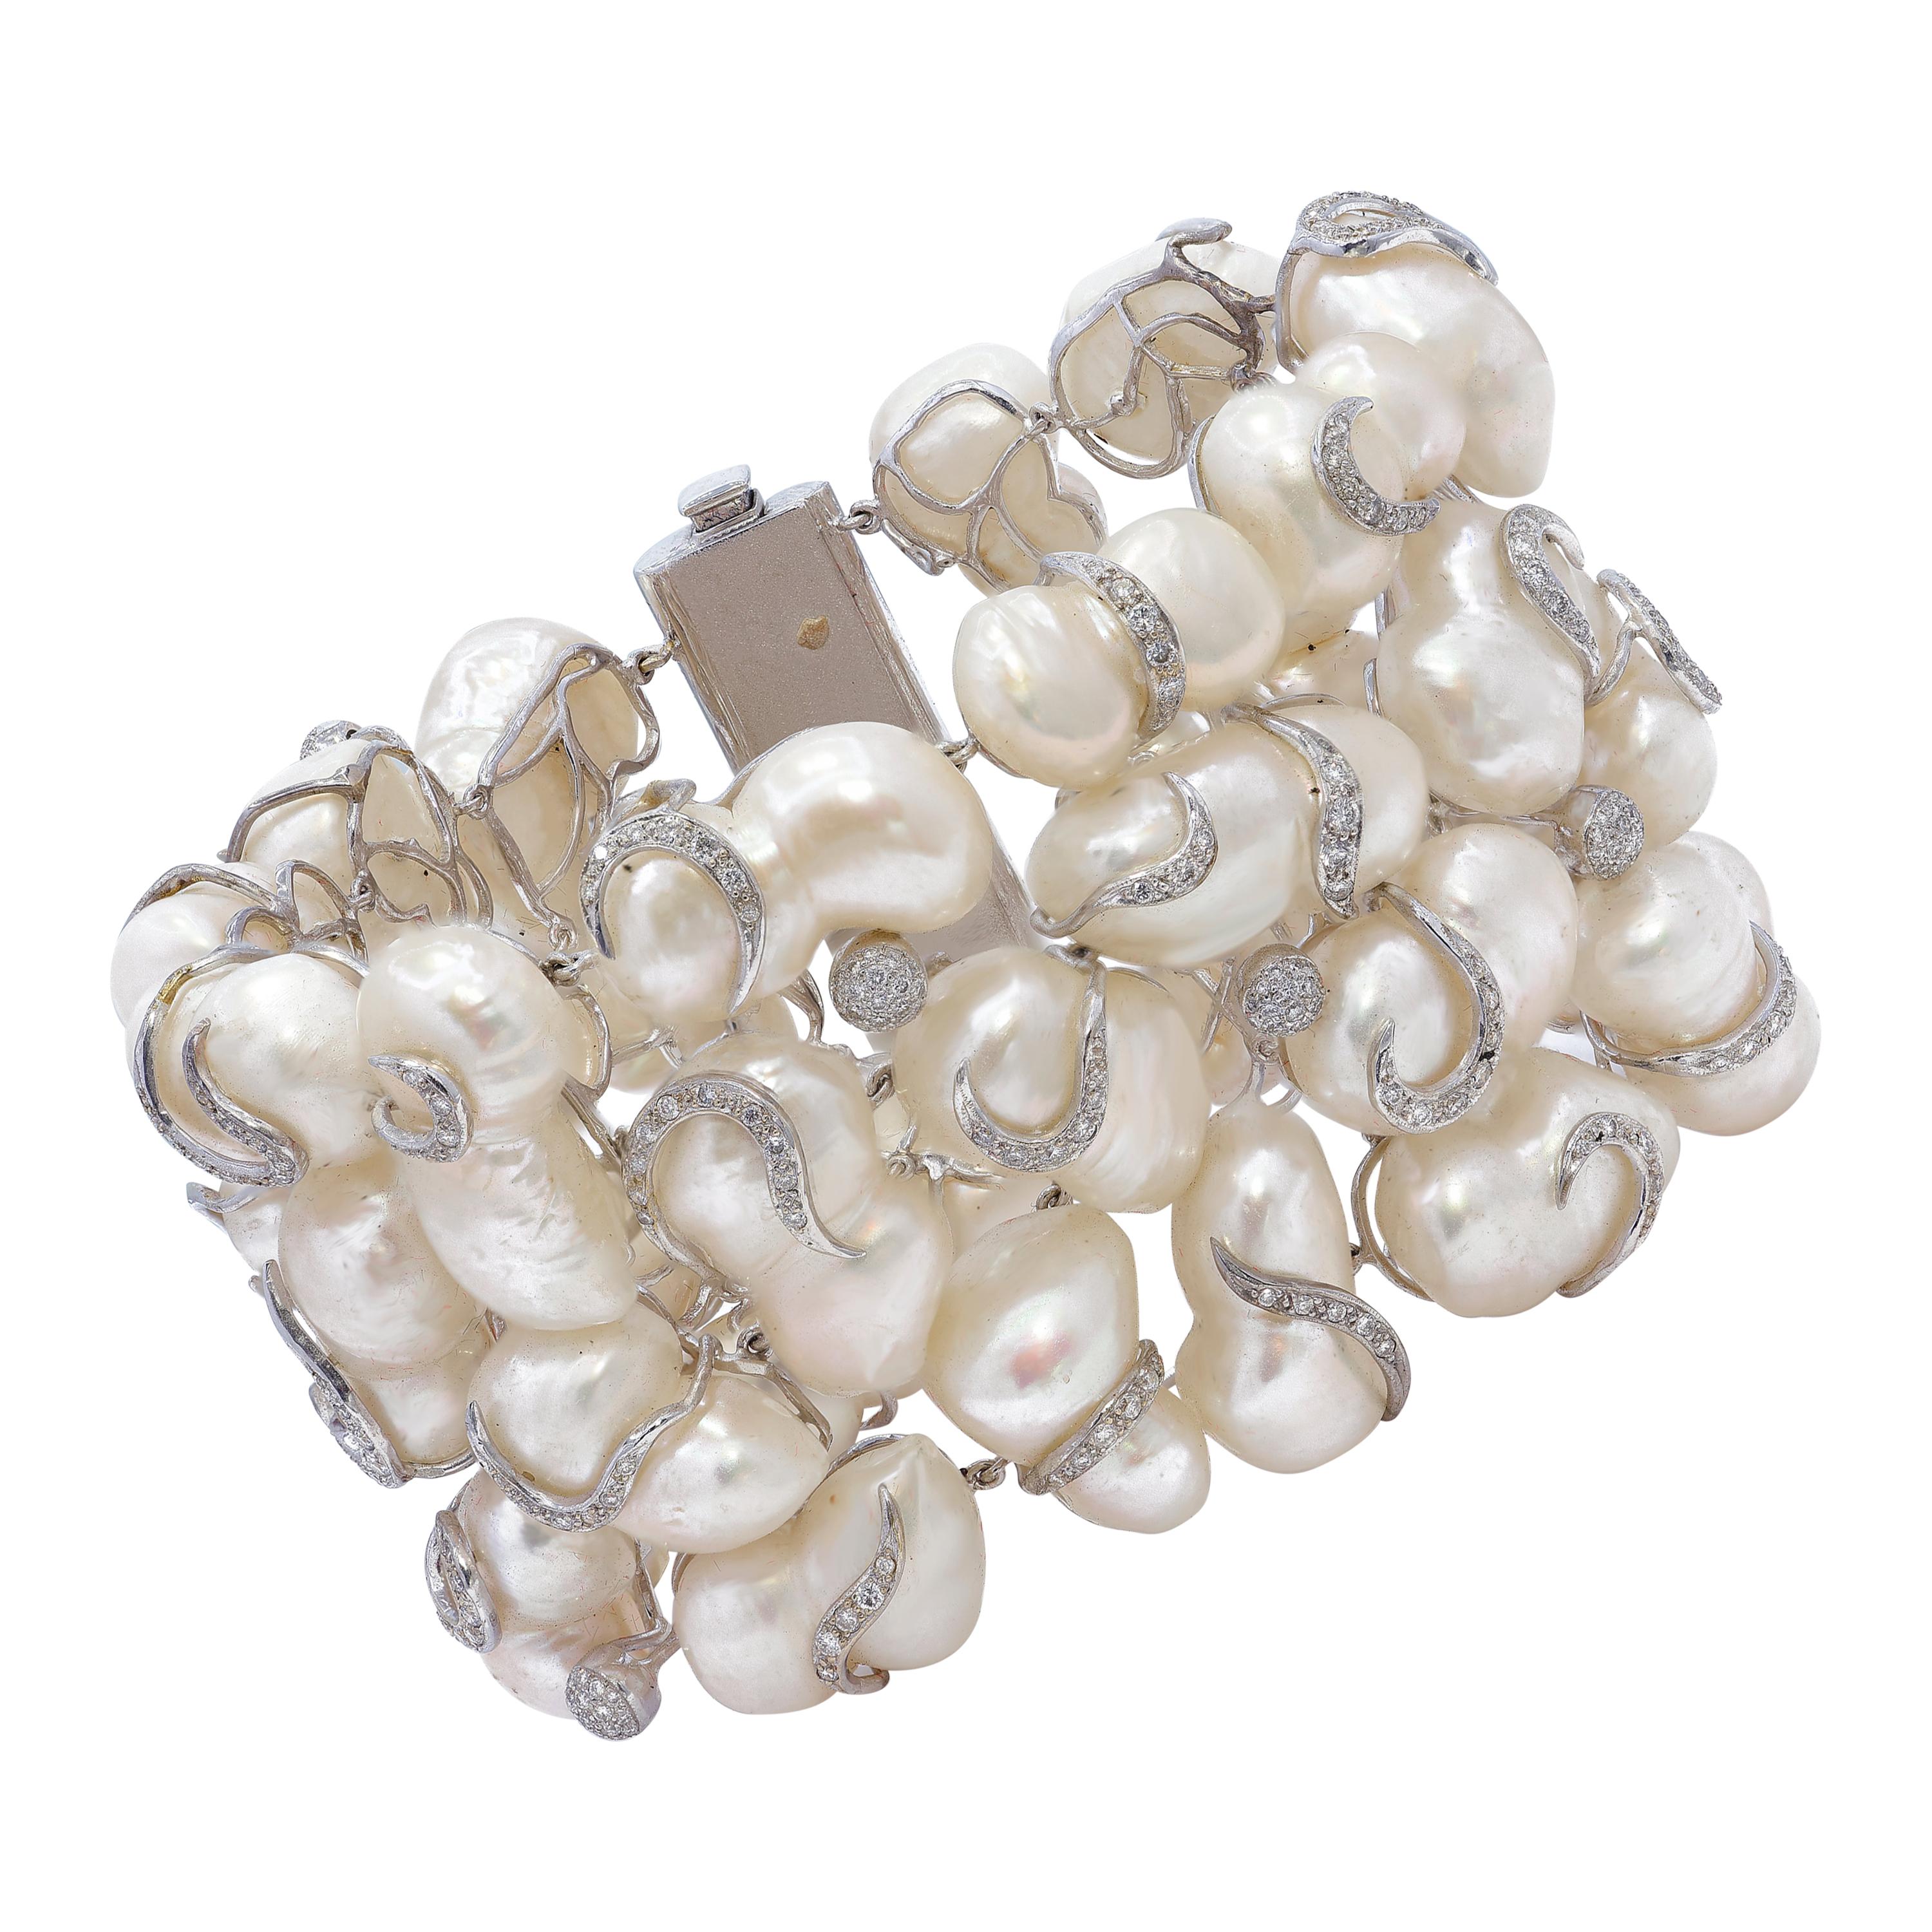 18kt White Gold Yvel Bracelet with Pearls and 5ct Diamonds 